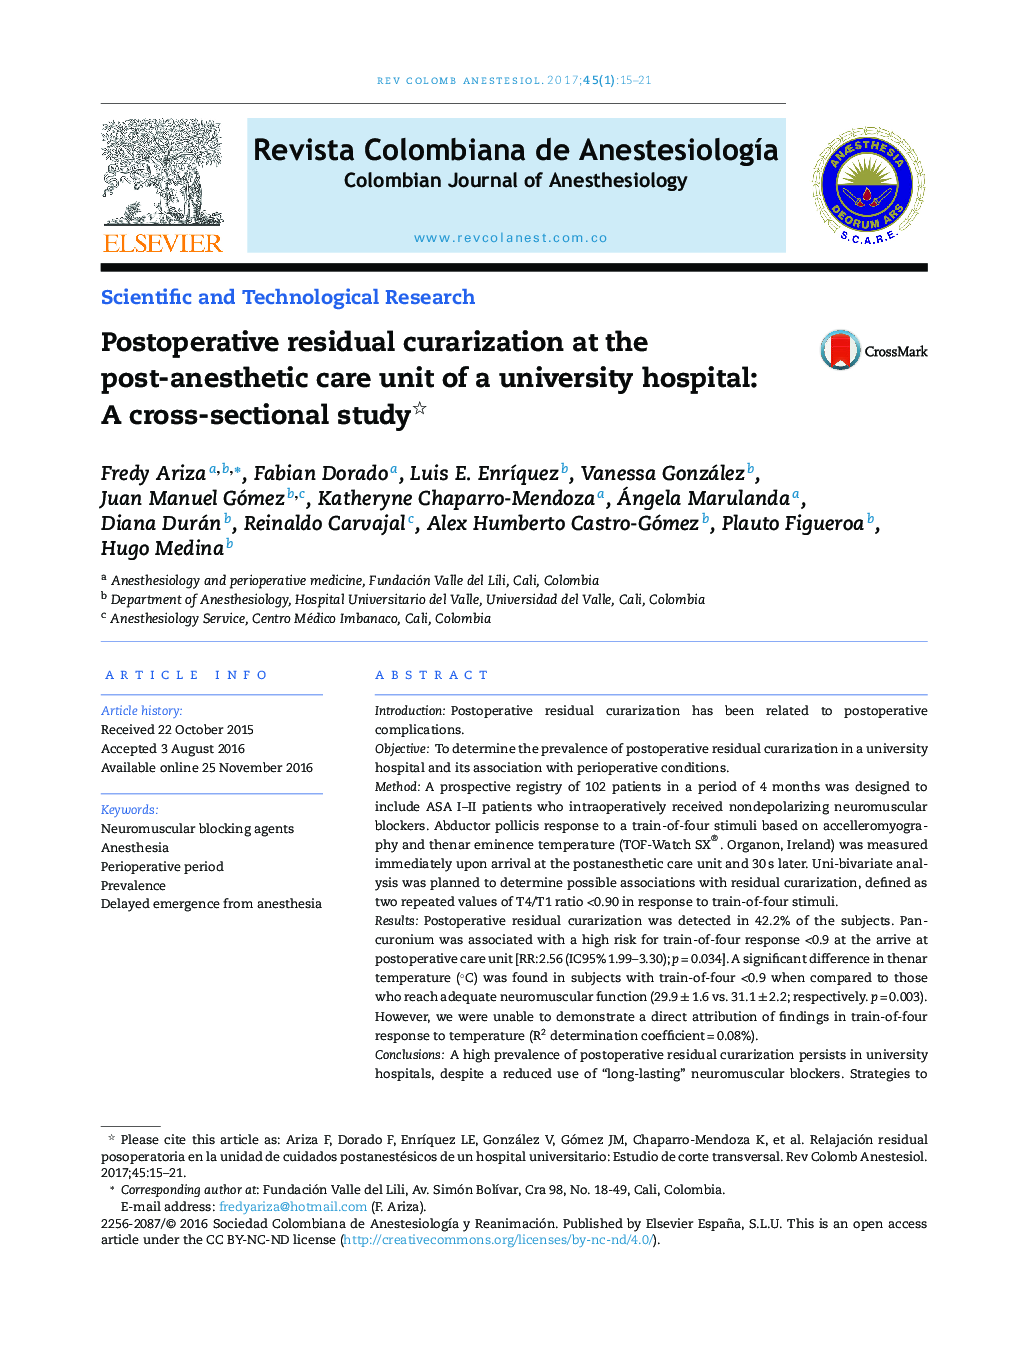 Postoperative residual curarization at the post-anesthetic care unit of a university hospital: A cross-sectional study